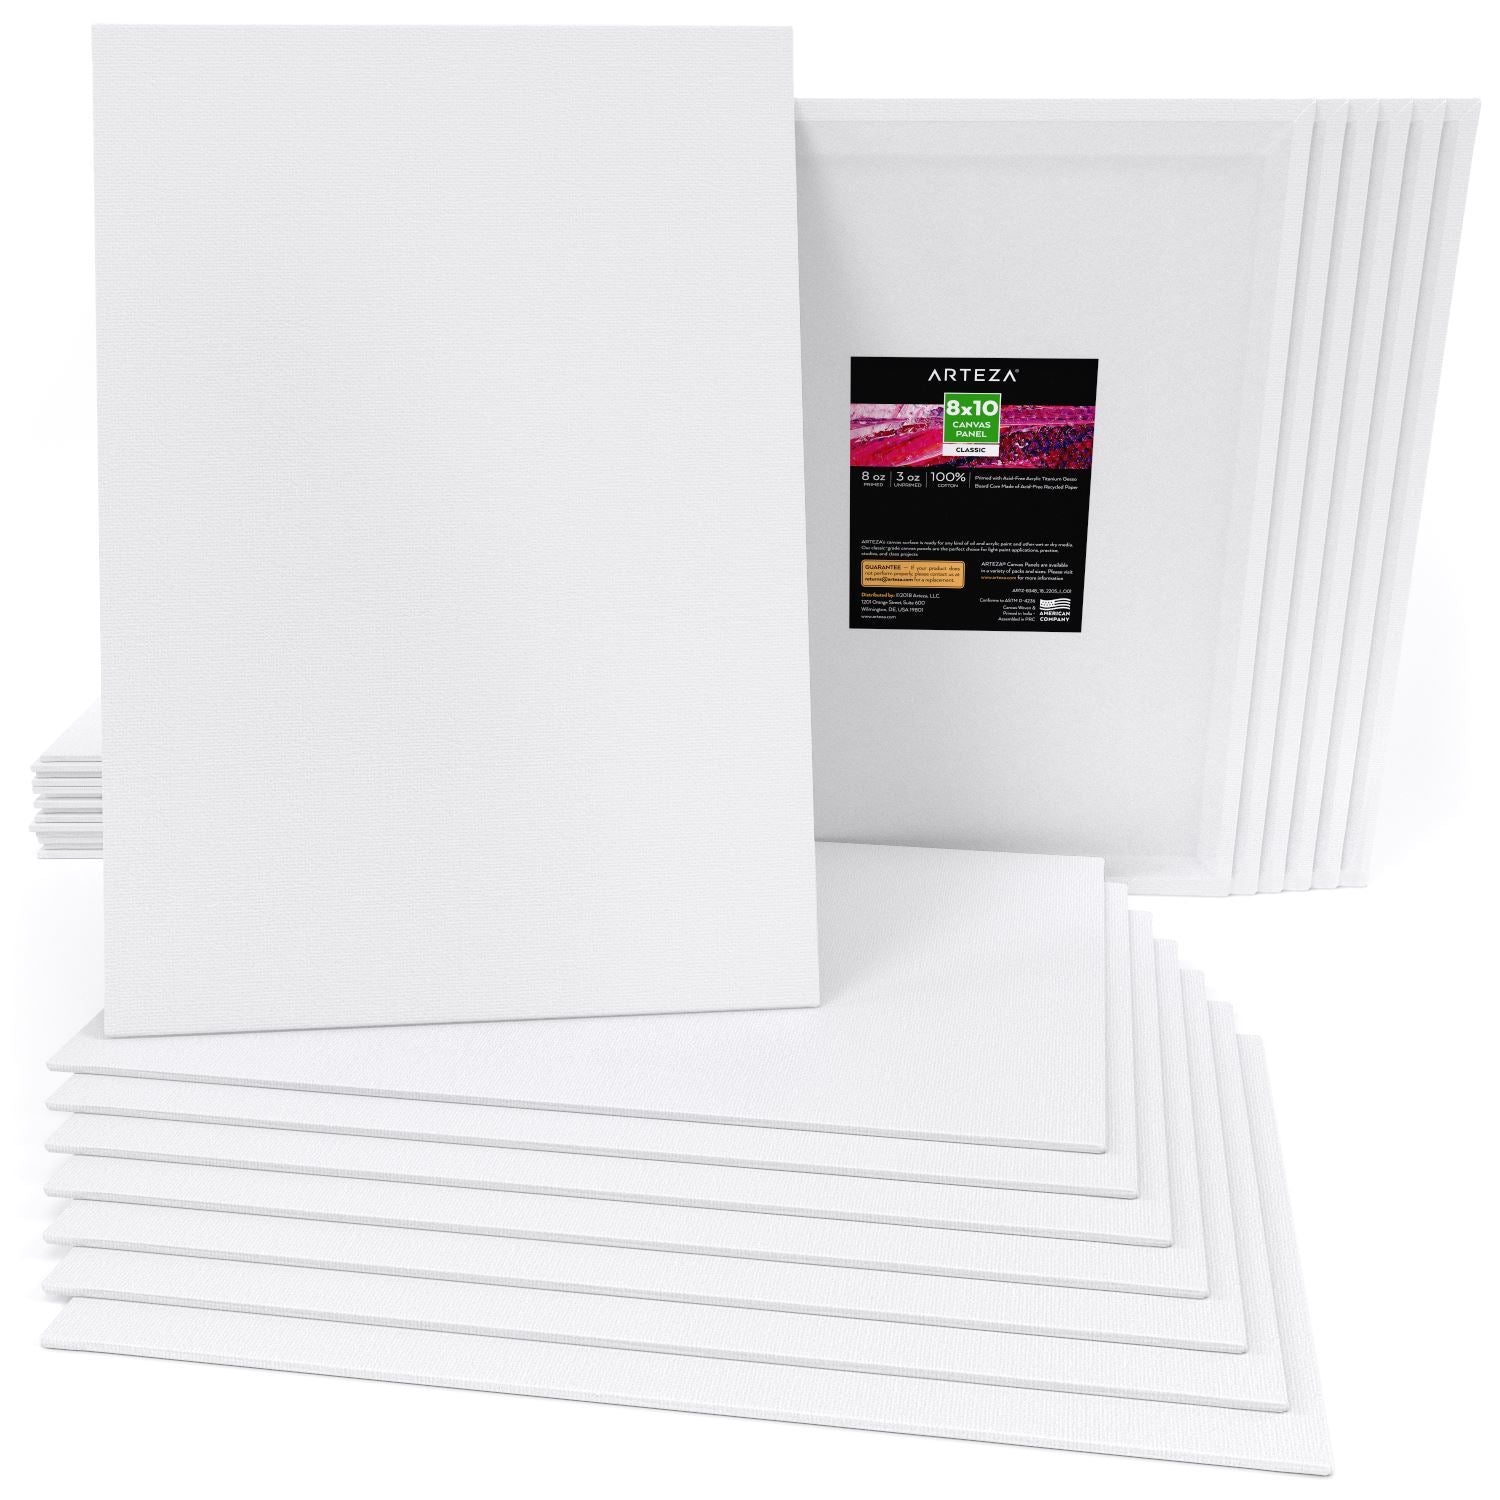 20 Pack Canvas Boards for Painting 8x10 Blank Art Canvases Panels